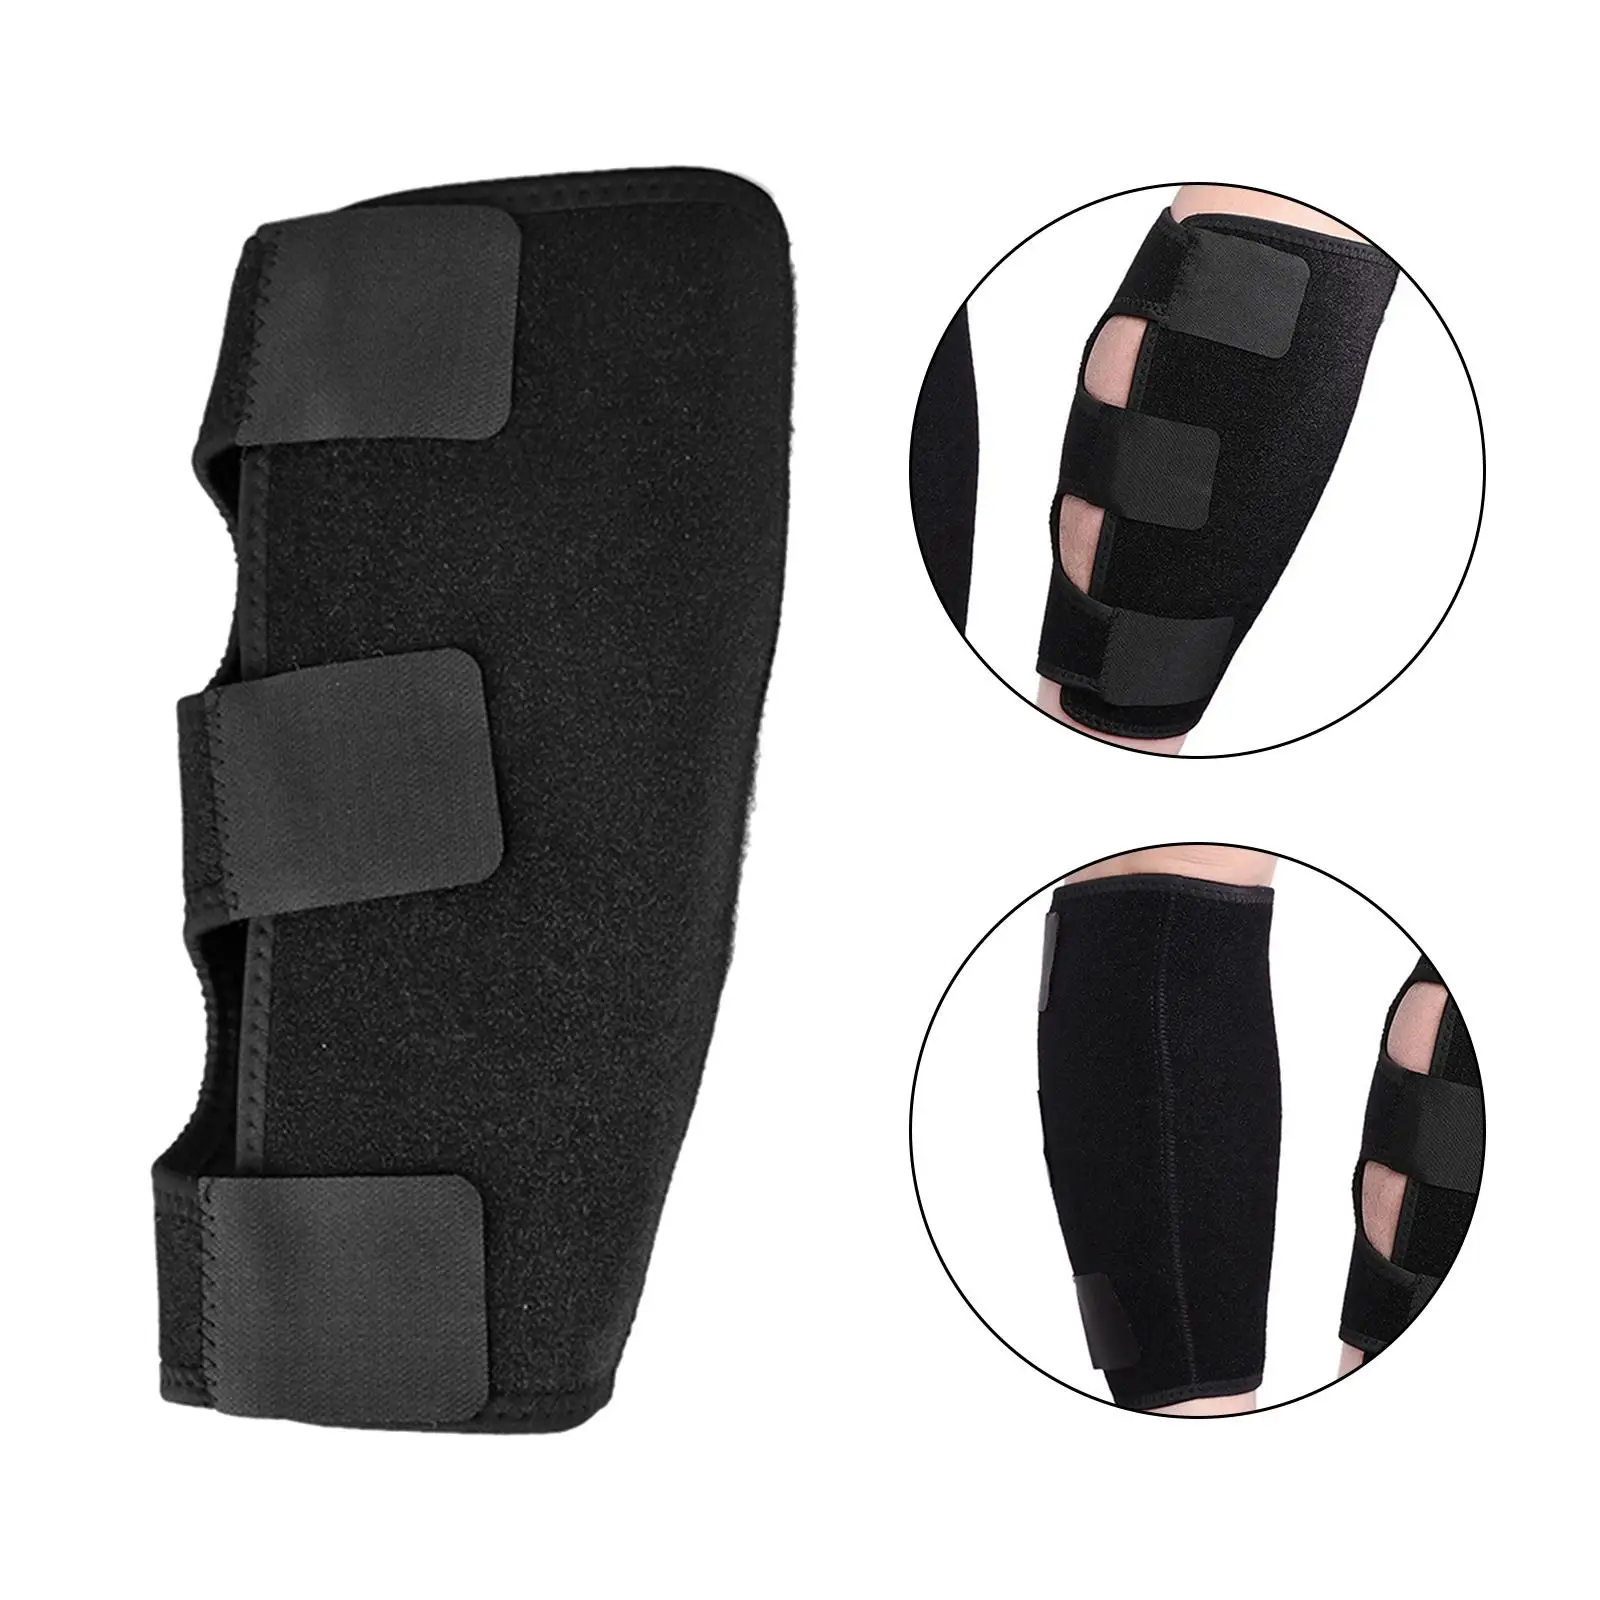 1 Piece Calf Support Brace Accessory Adjustable for outdoor sports Training Running